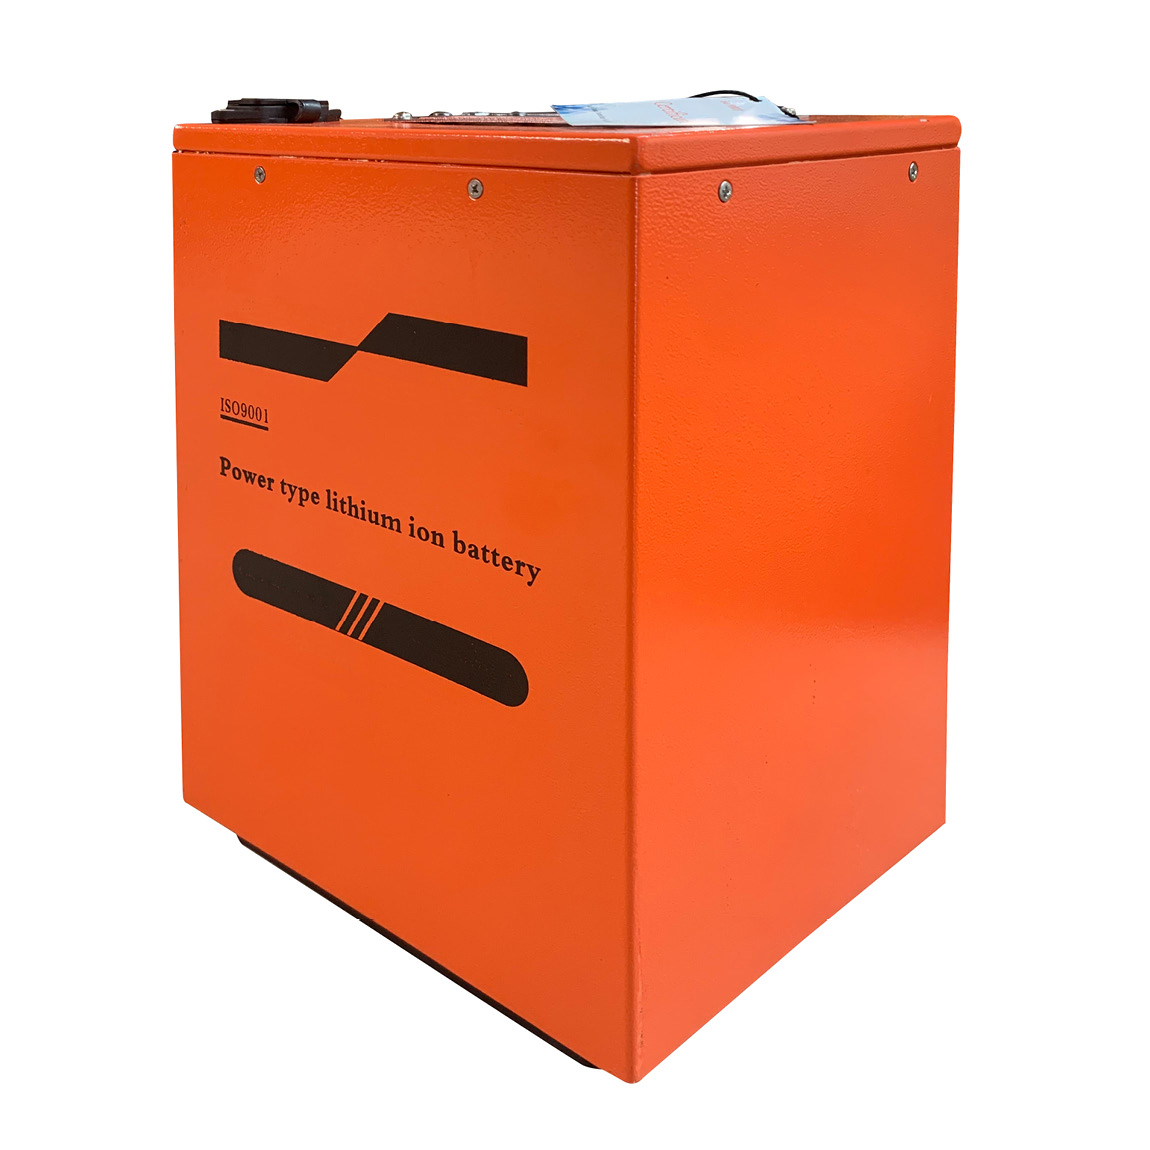 This lithium ion battery can be purchased as a replacement or spare for the concrete finishing power trowel supplied by Speedcrete, United Kingdom.